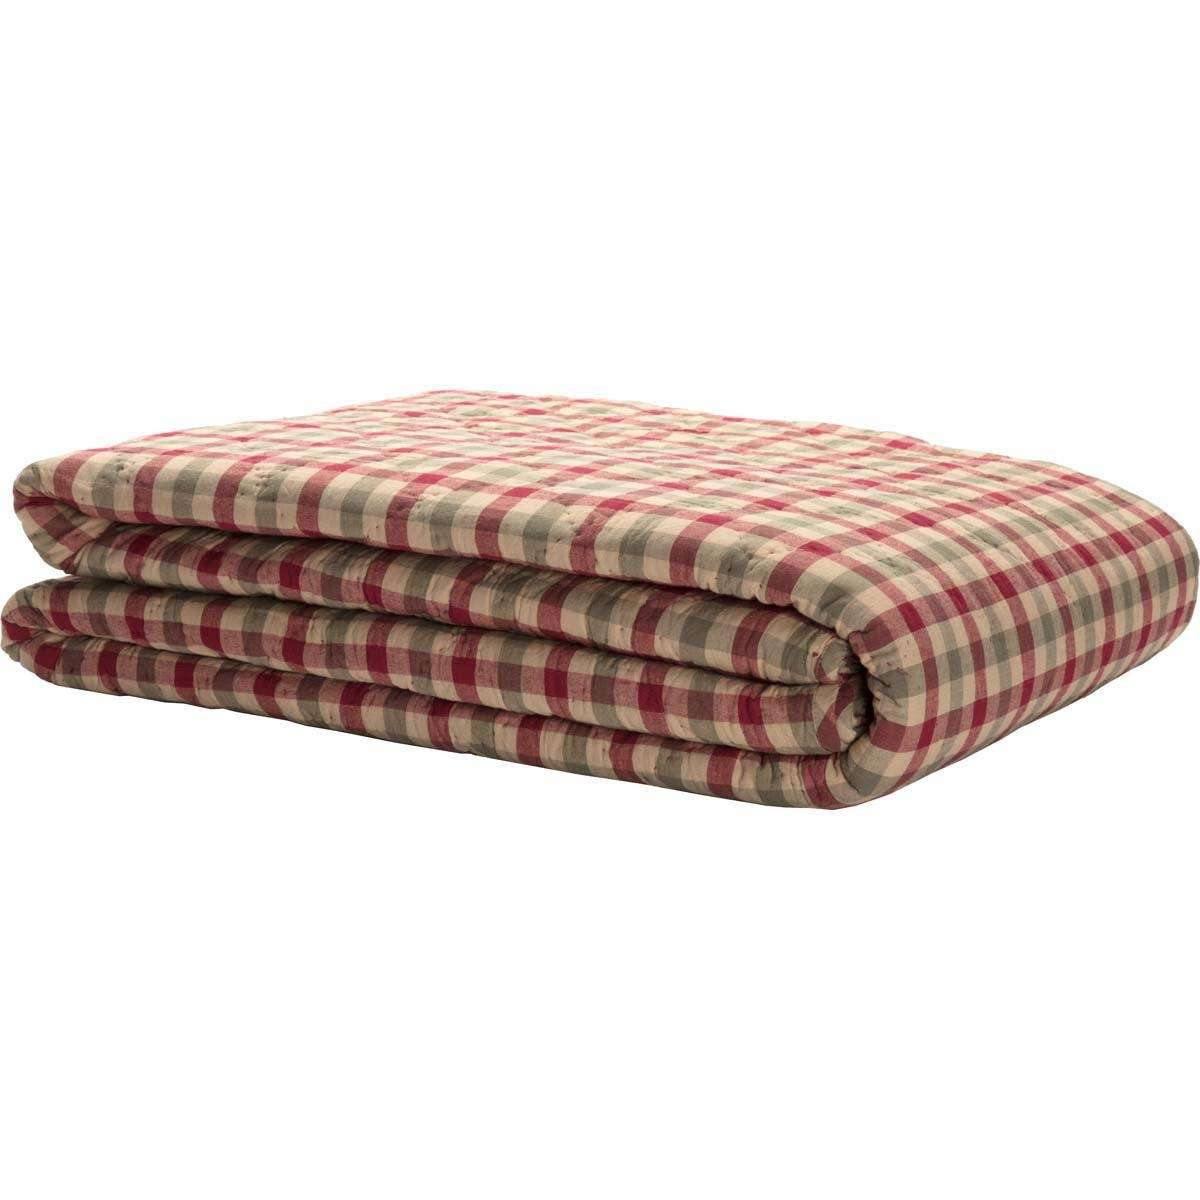 Jonathan Plaid King Quilt 105Wx95L VHC Brands folded